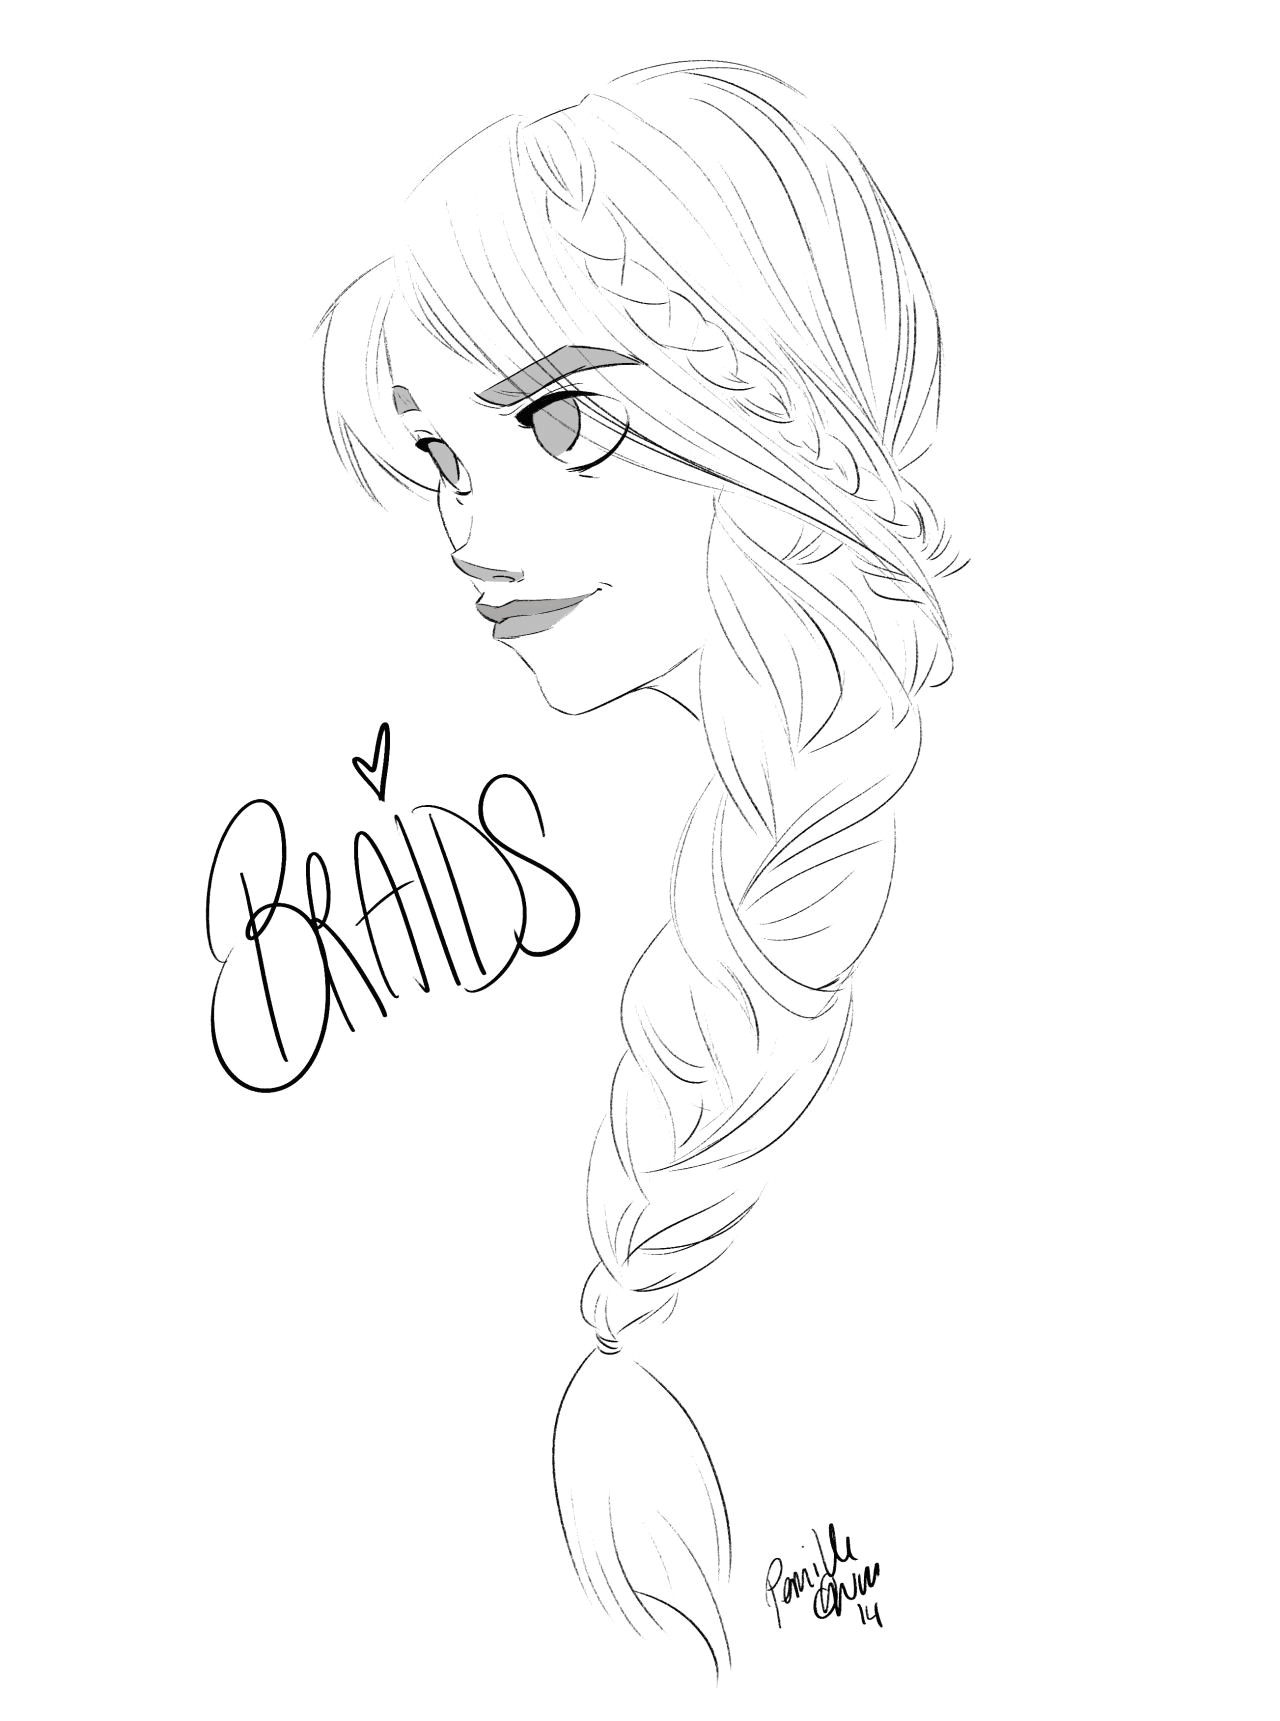 Drawing Of French Things today S Warmup I Have A Thing for Braids at the Moment Art by